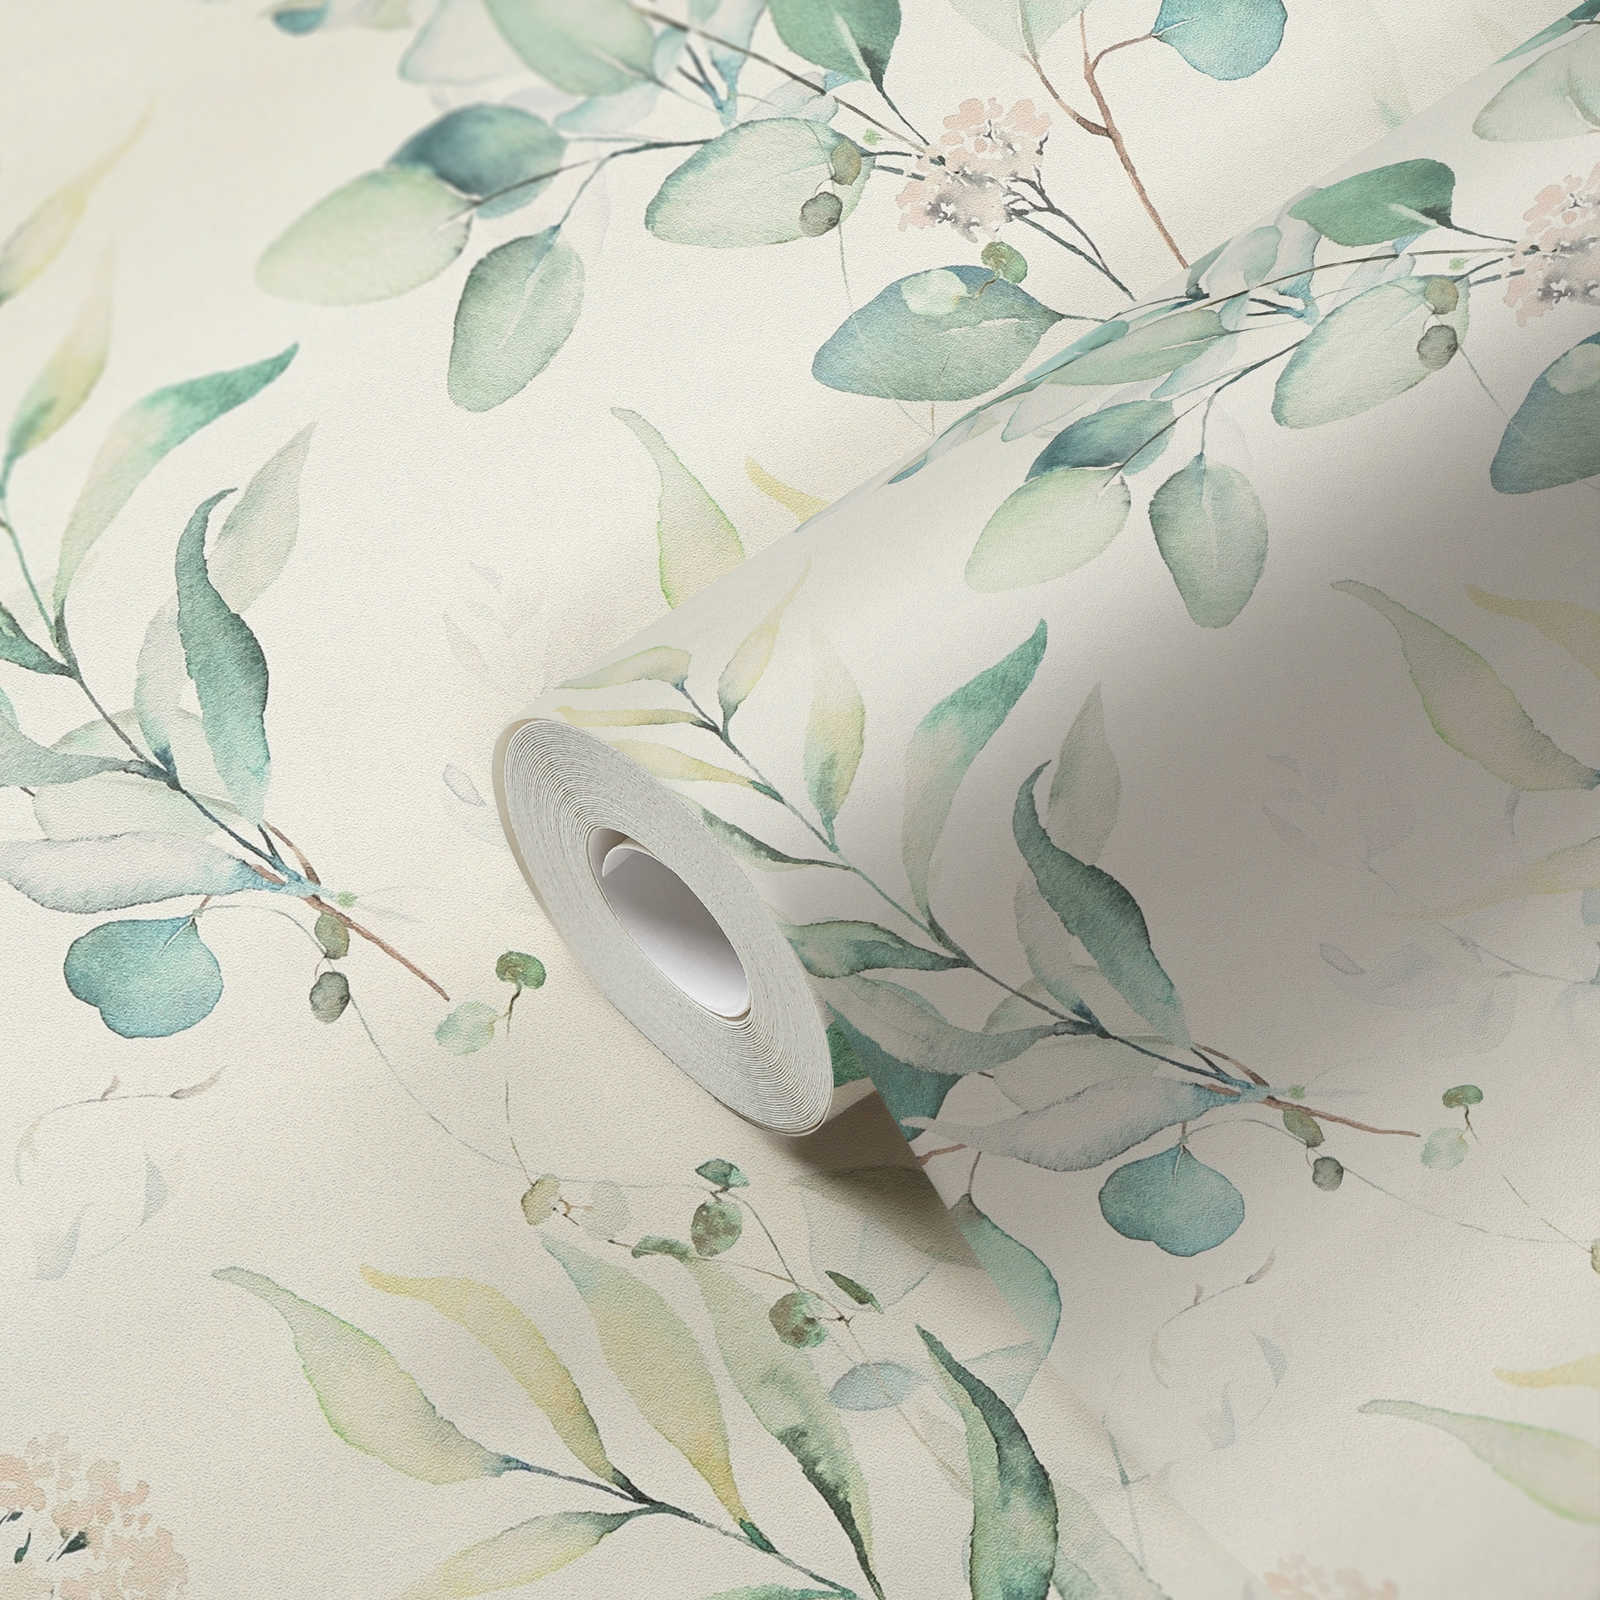             Non-woven wallpaper with watercolour leaf pattern - cream, green
        